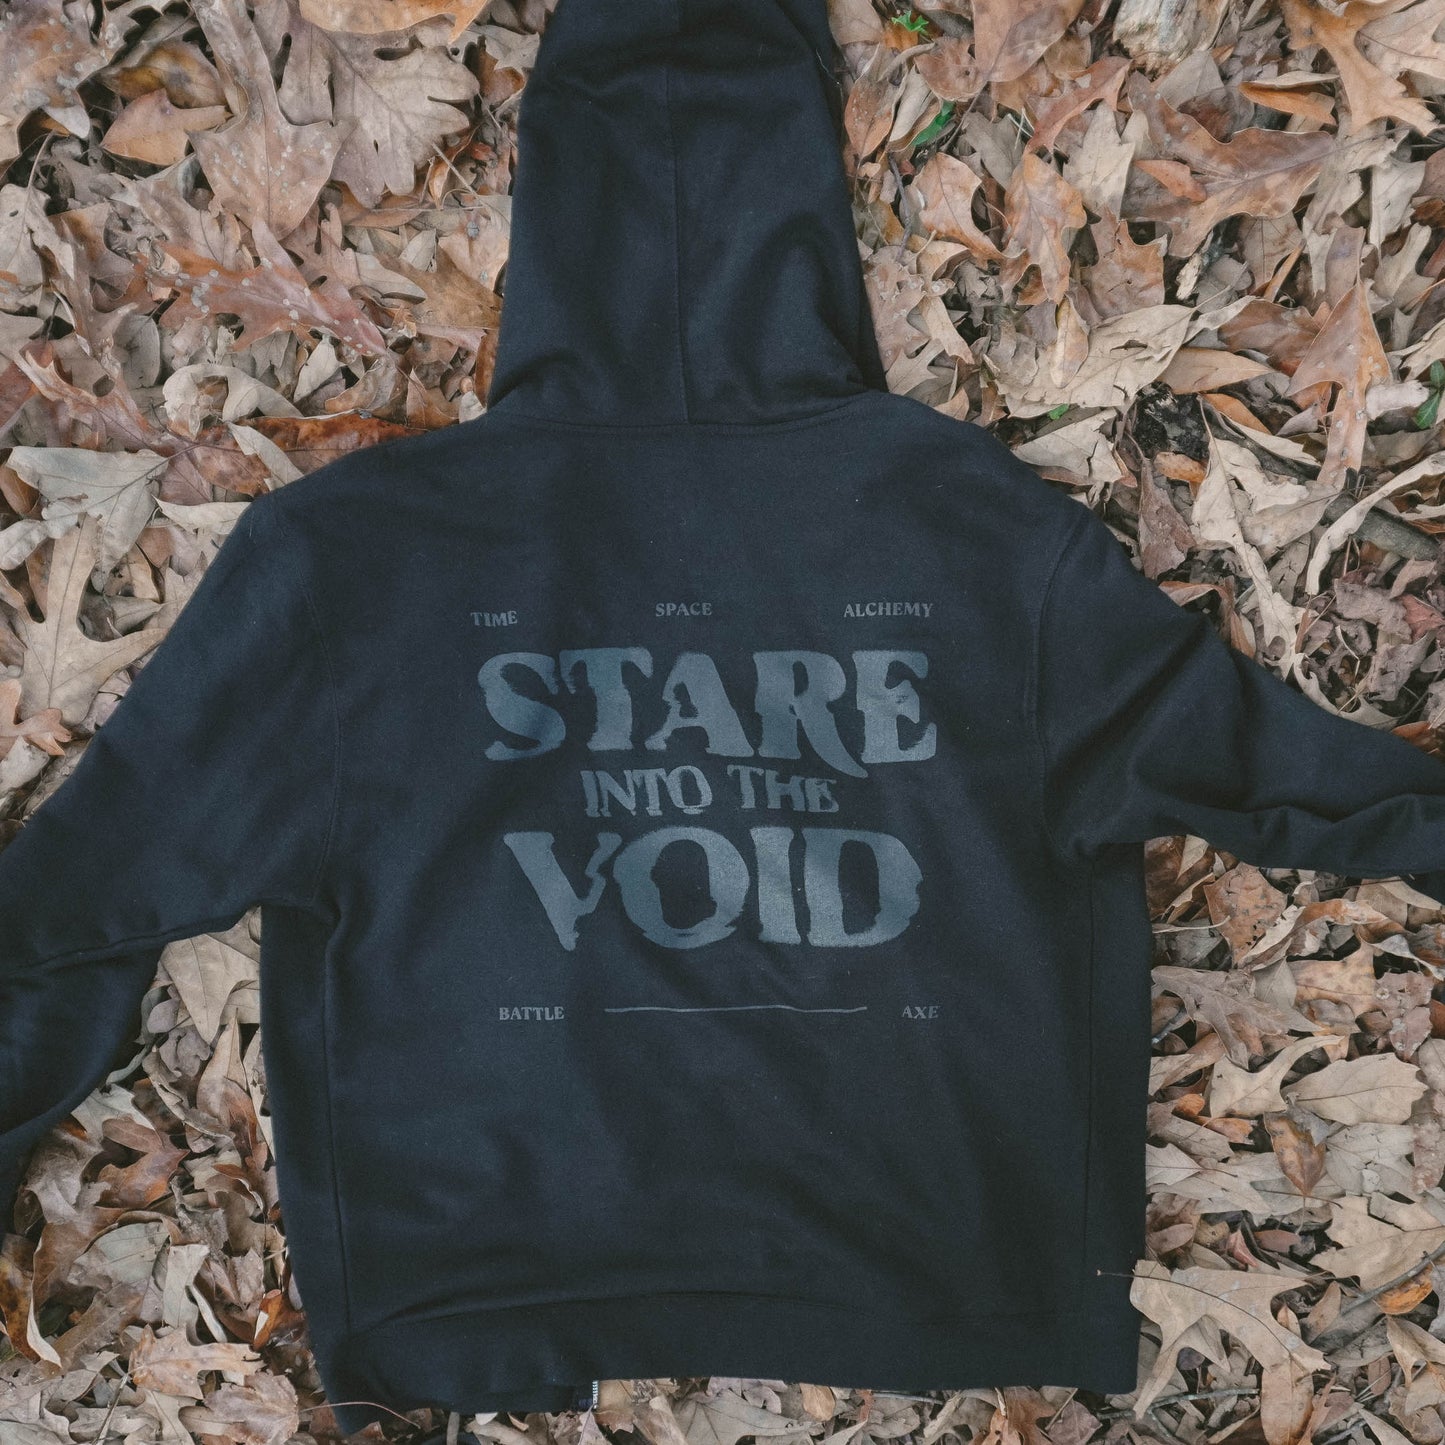 Stare into the void